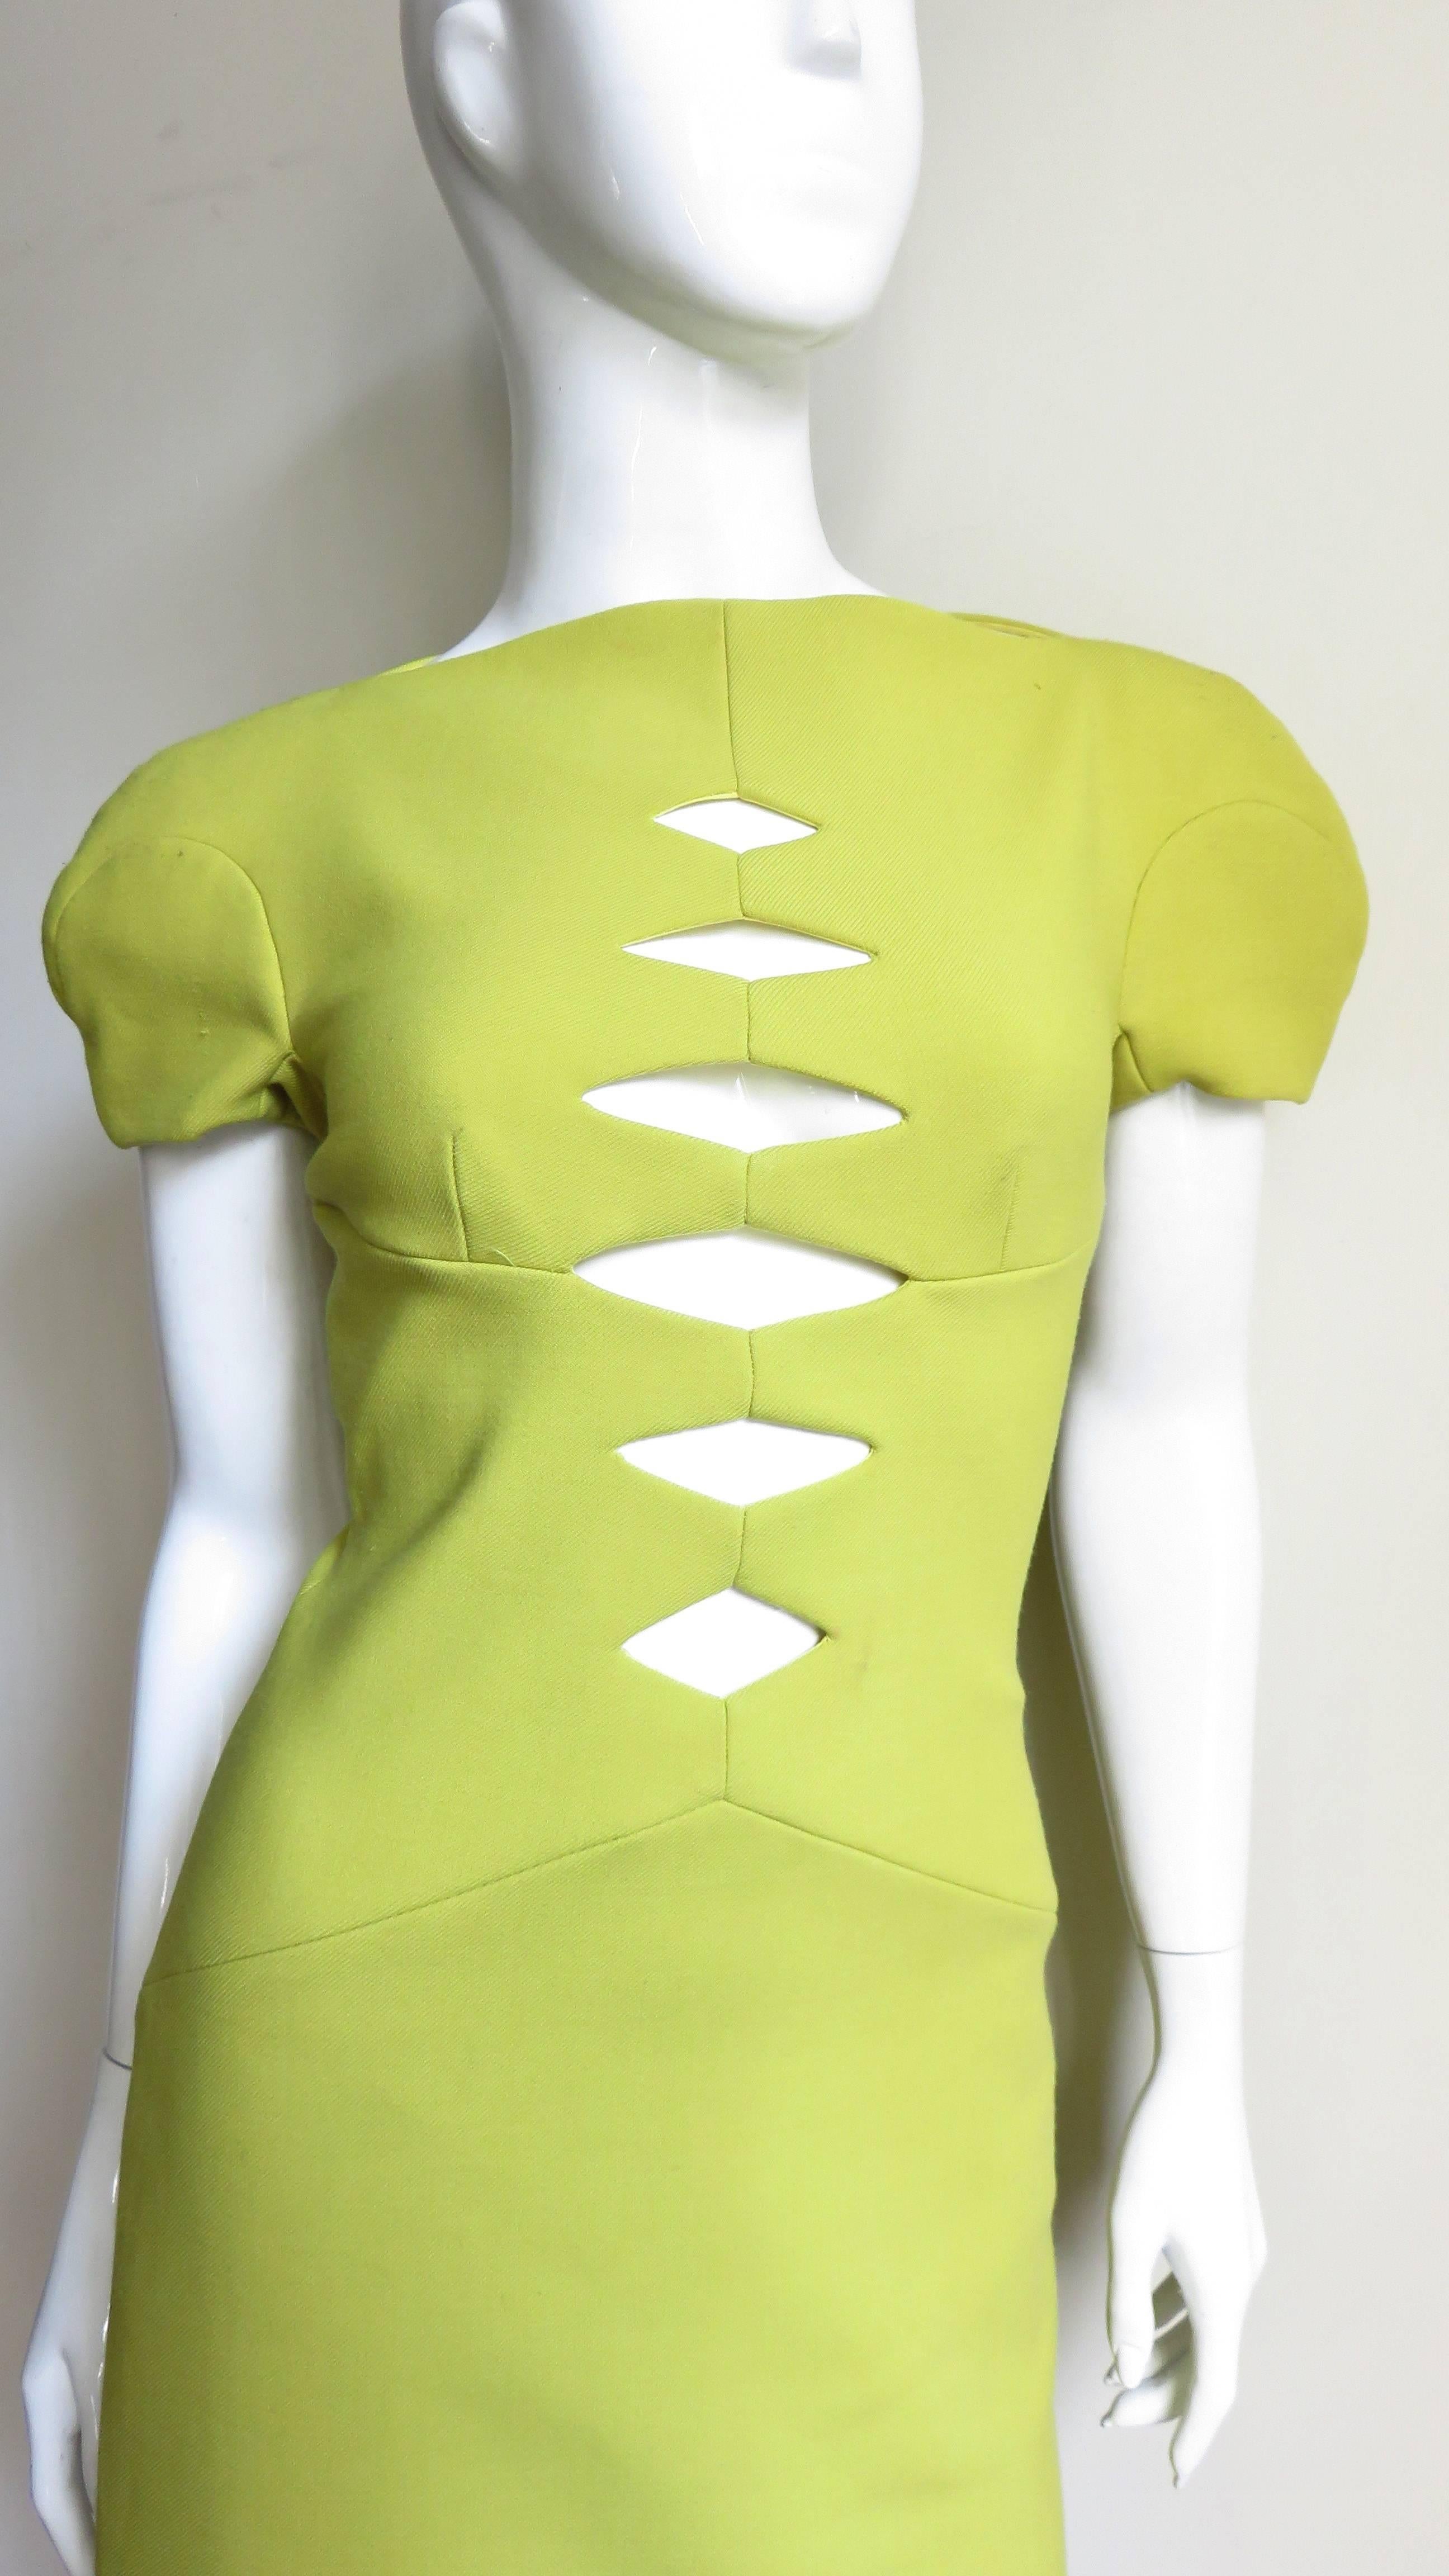 A fabulous little dress in lemon lime light weight wool from the Versus line of Versace.  It has a bateau neckline and defined pieced cap sleeves created with seaming.  The bodice has a subtle V seam under the bust and an inverted V at the hips. 